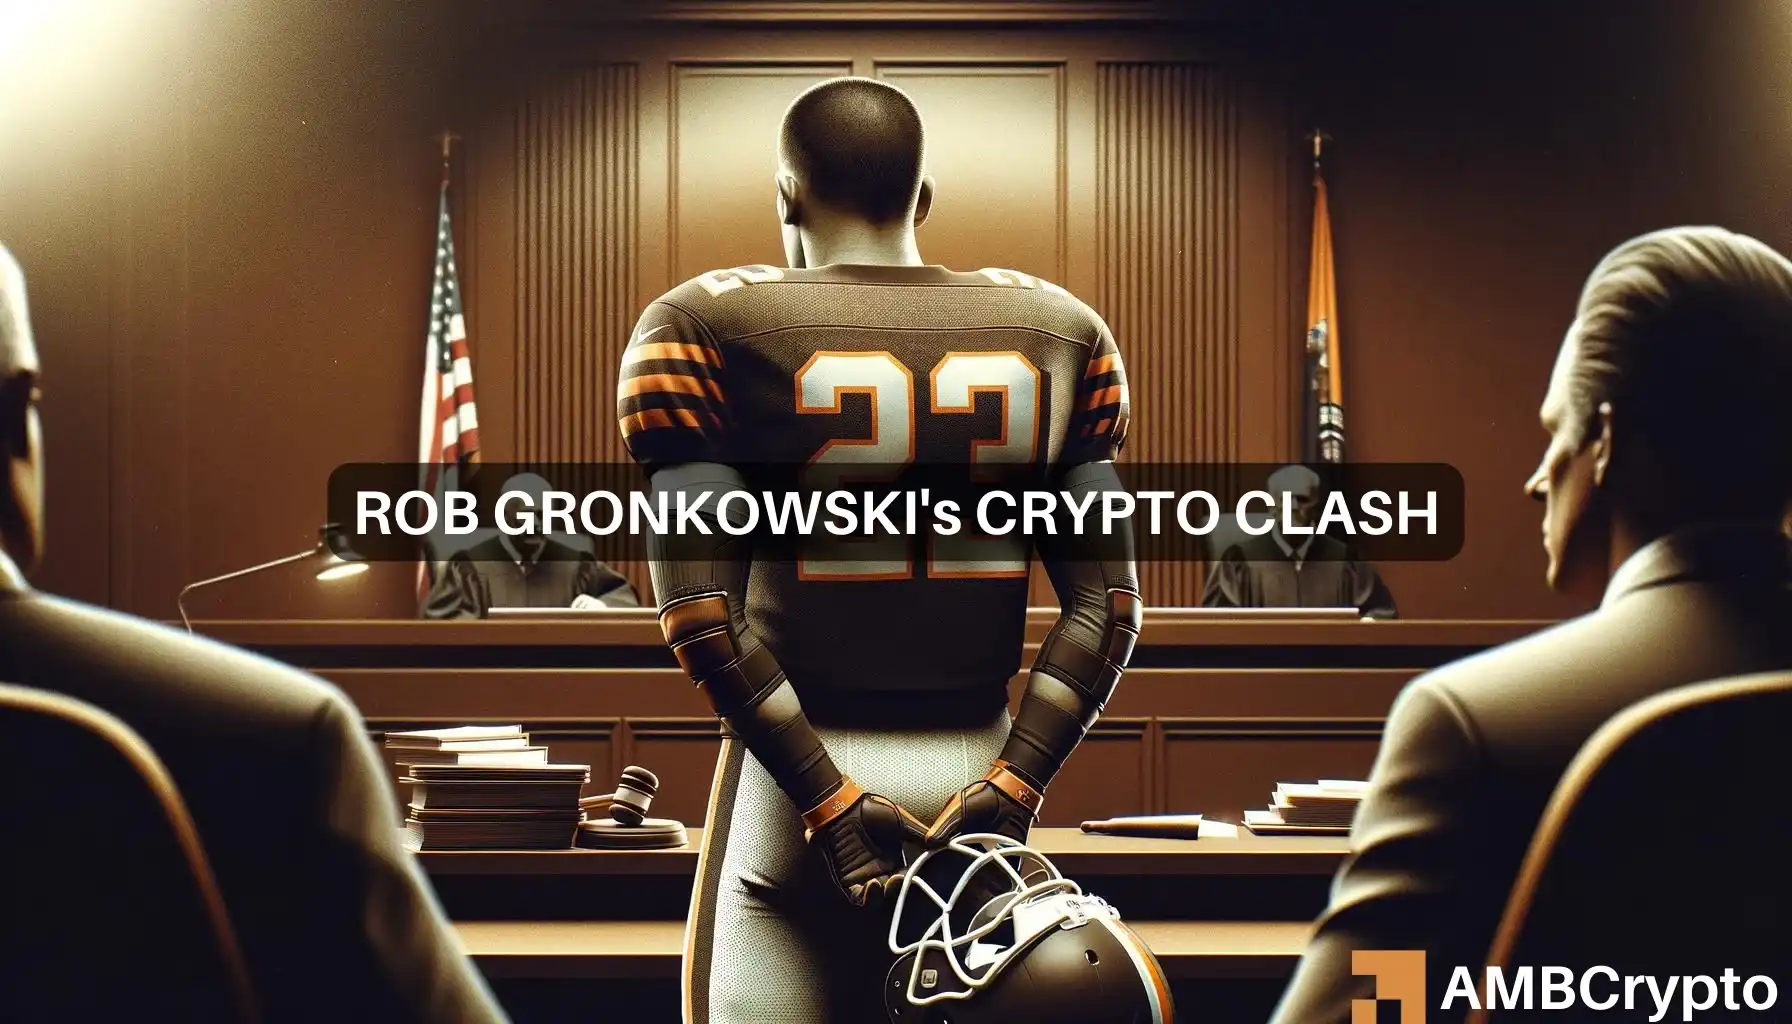 Rob Gronkowski crypto promotions: 'Sincere empathy for fans' - Lawyer